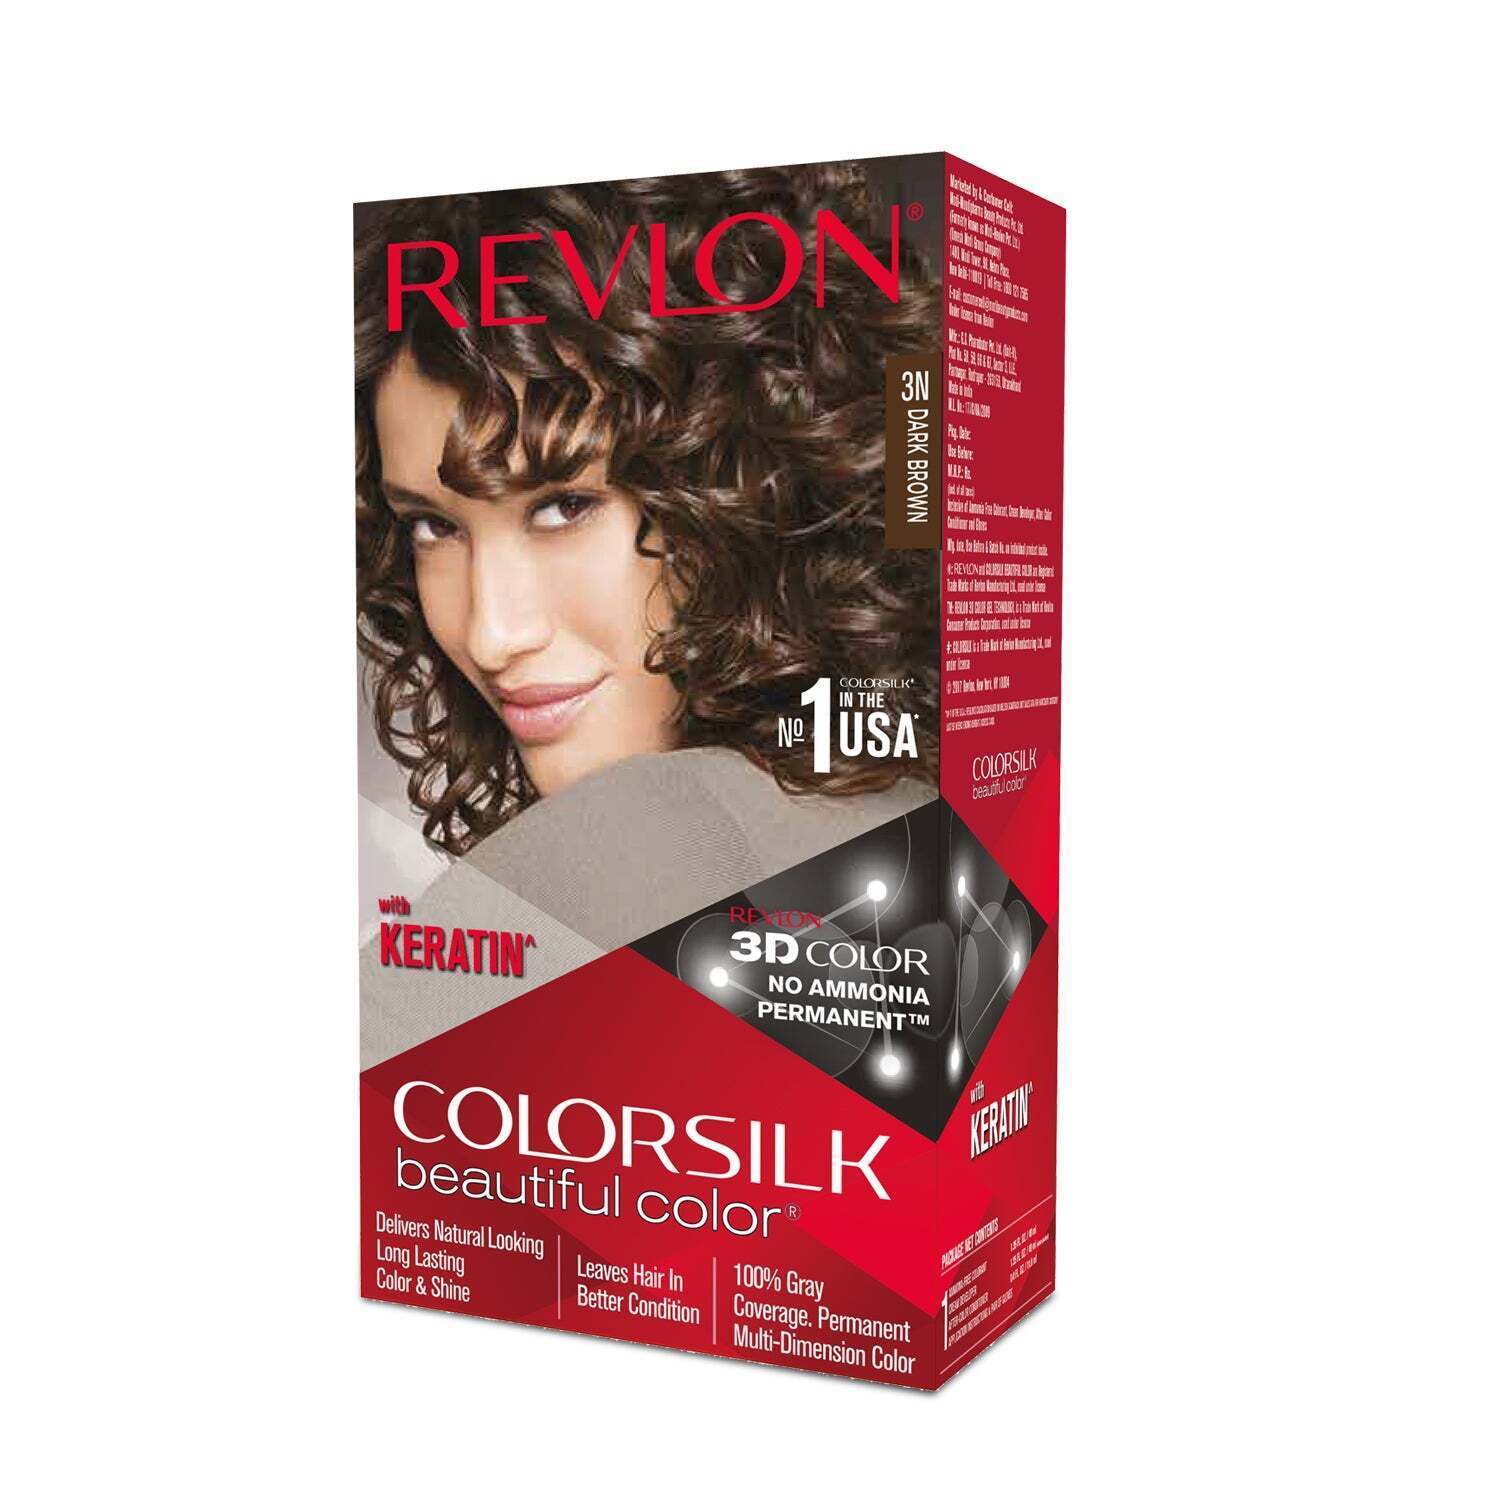 Primary image for Revlon Color Silk Hair Color with Keratin, No Ammonia 3D color, (3N Dark Brown)